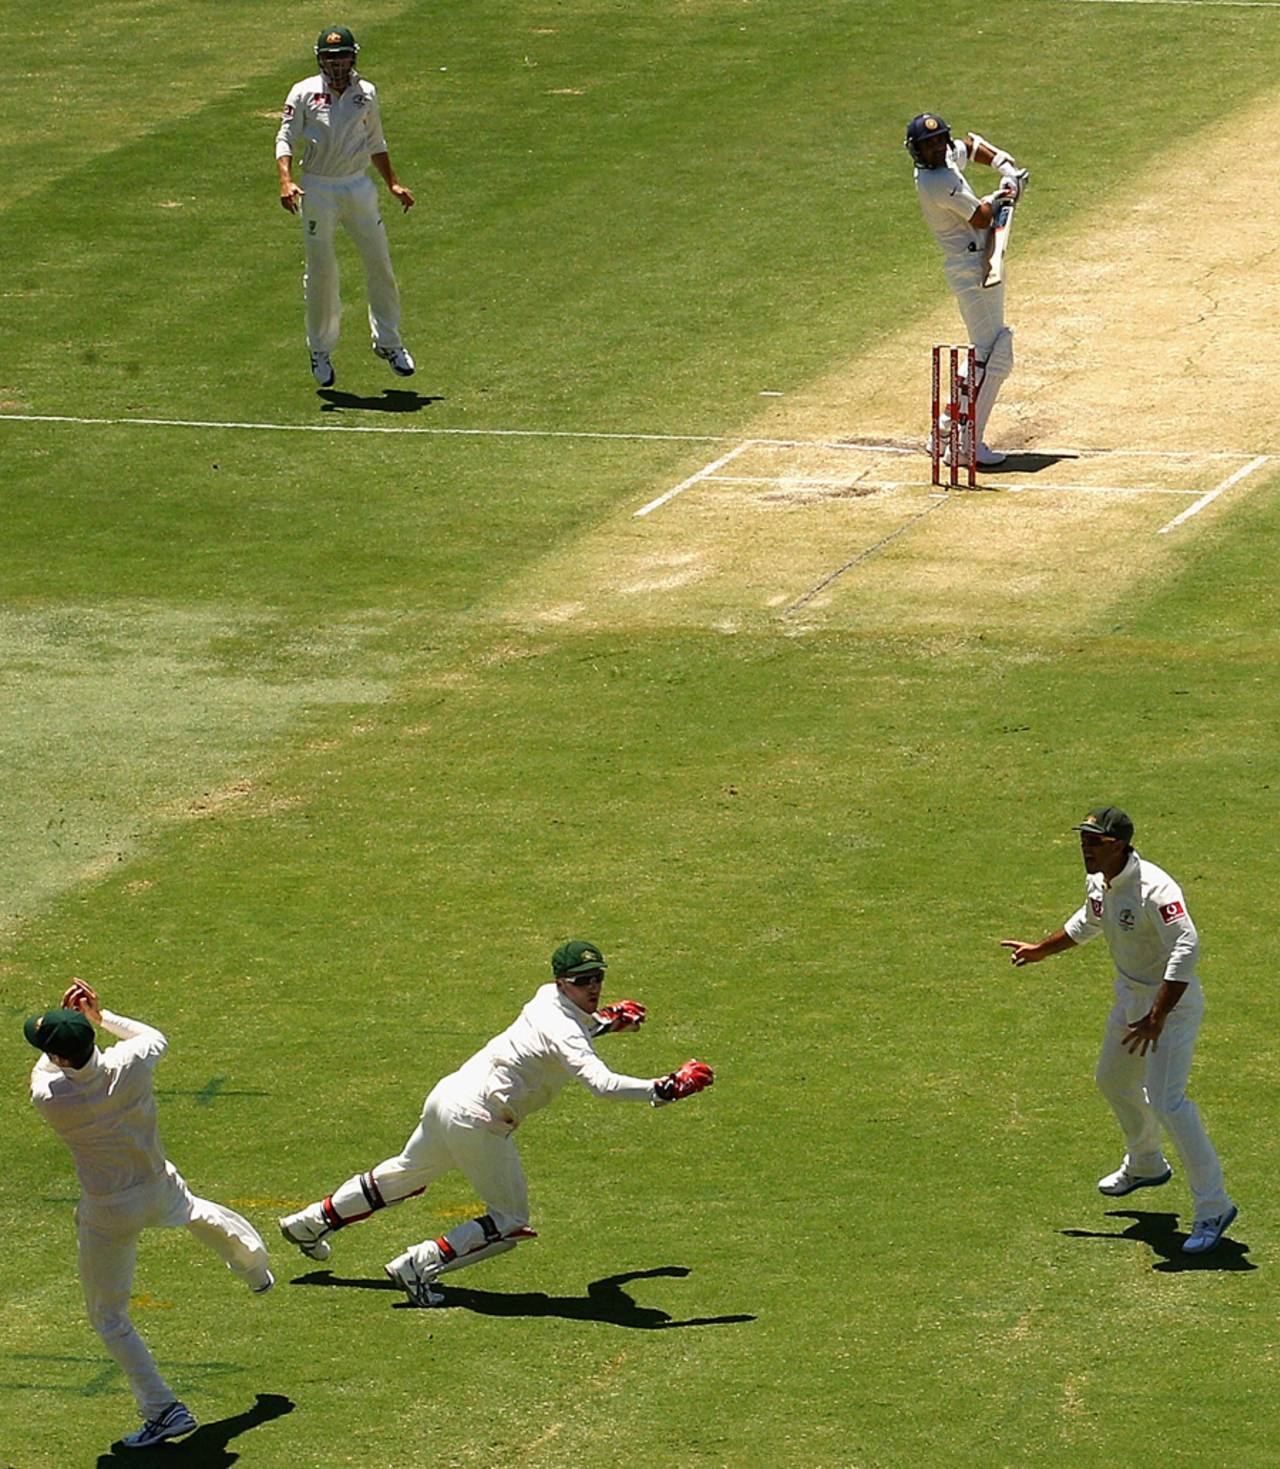 Zaheer Khan fends one to Michael Clarke at first slip, Australia v India, 3rd Test, Perth, 3rd day, January 15, 2012